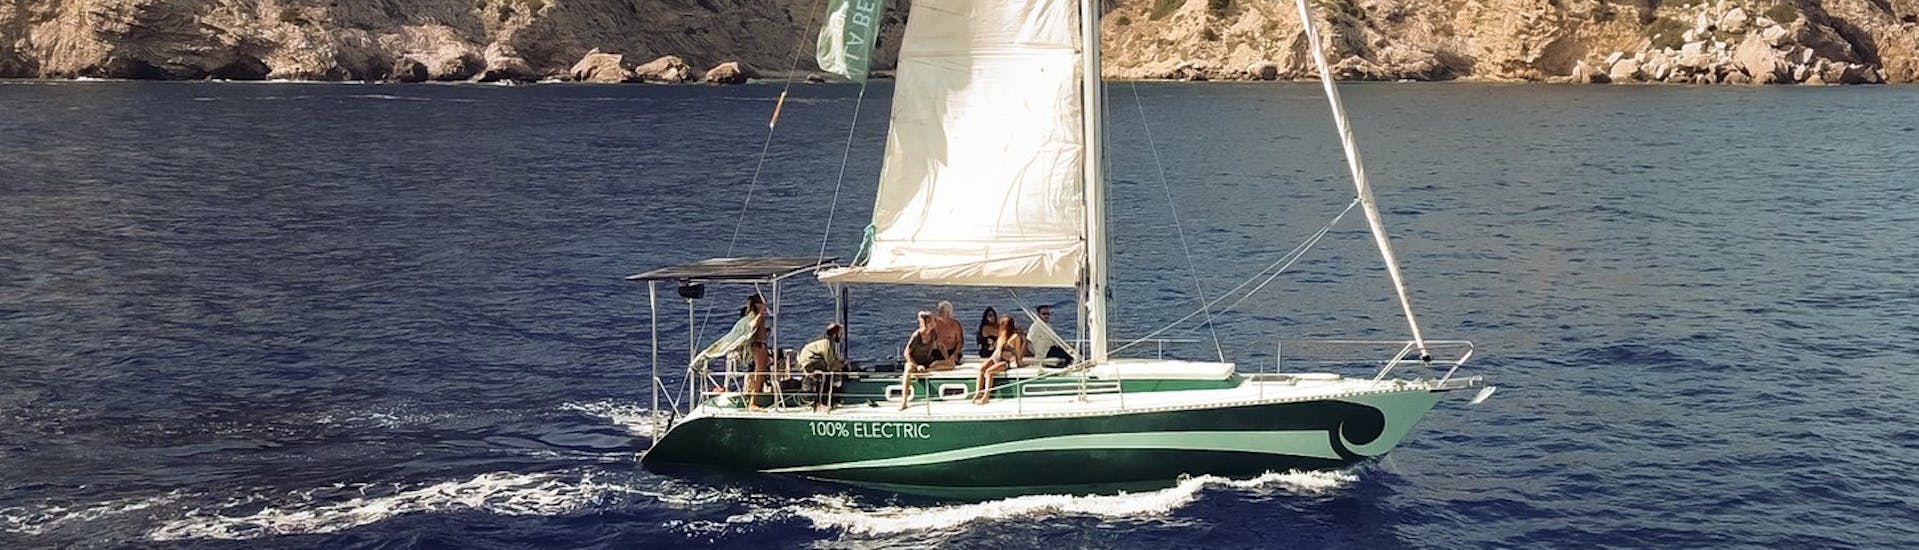 Our monohull navigates along the coast during the Private Sunset Boat Trip around Ibiza with La Bella Verde Ibiza.